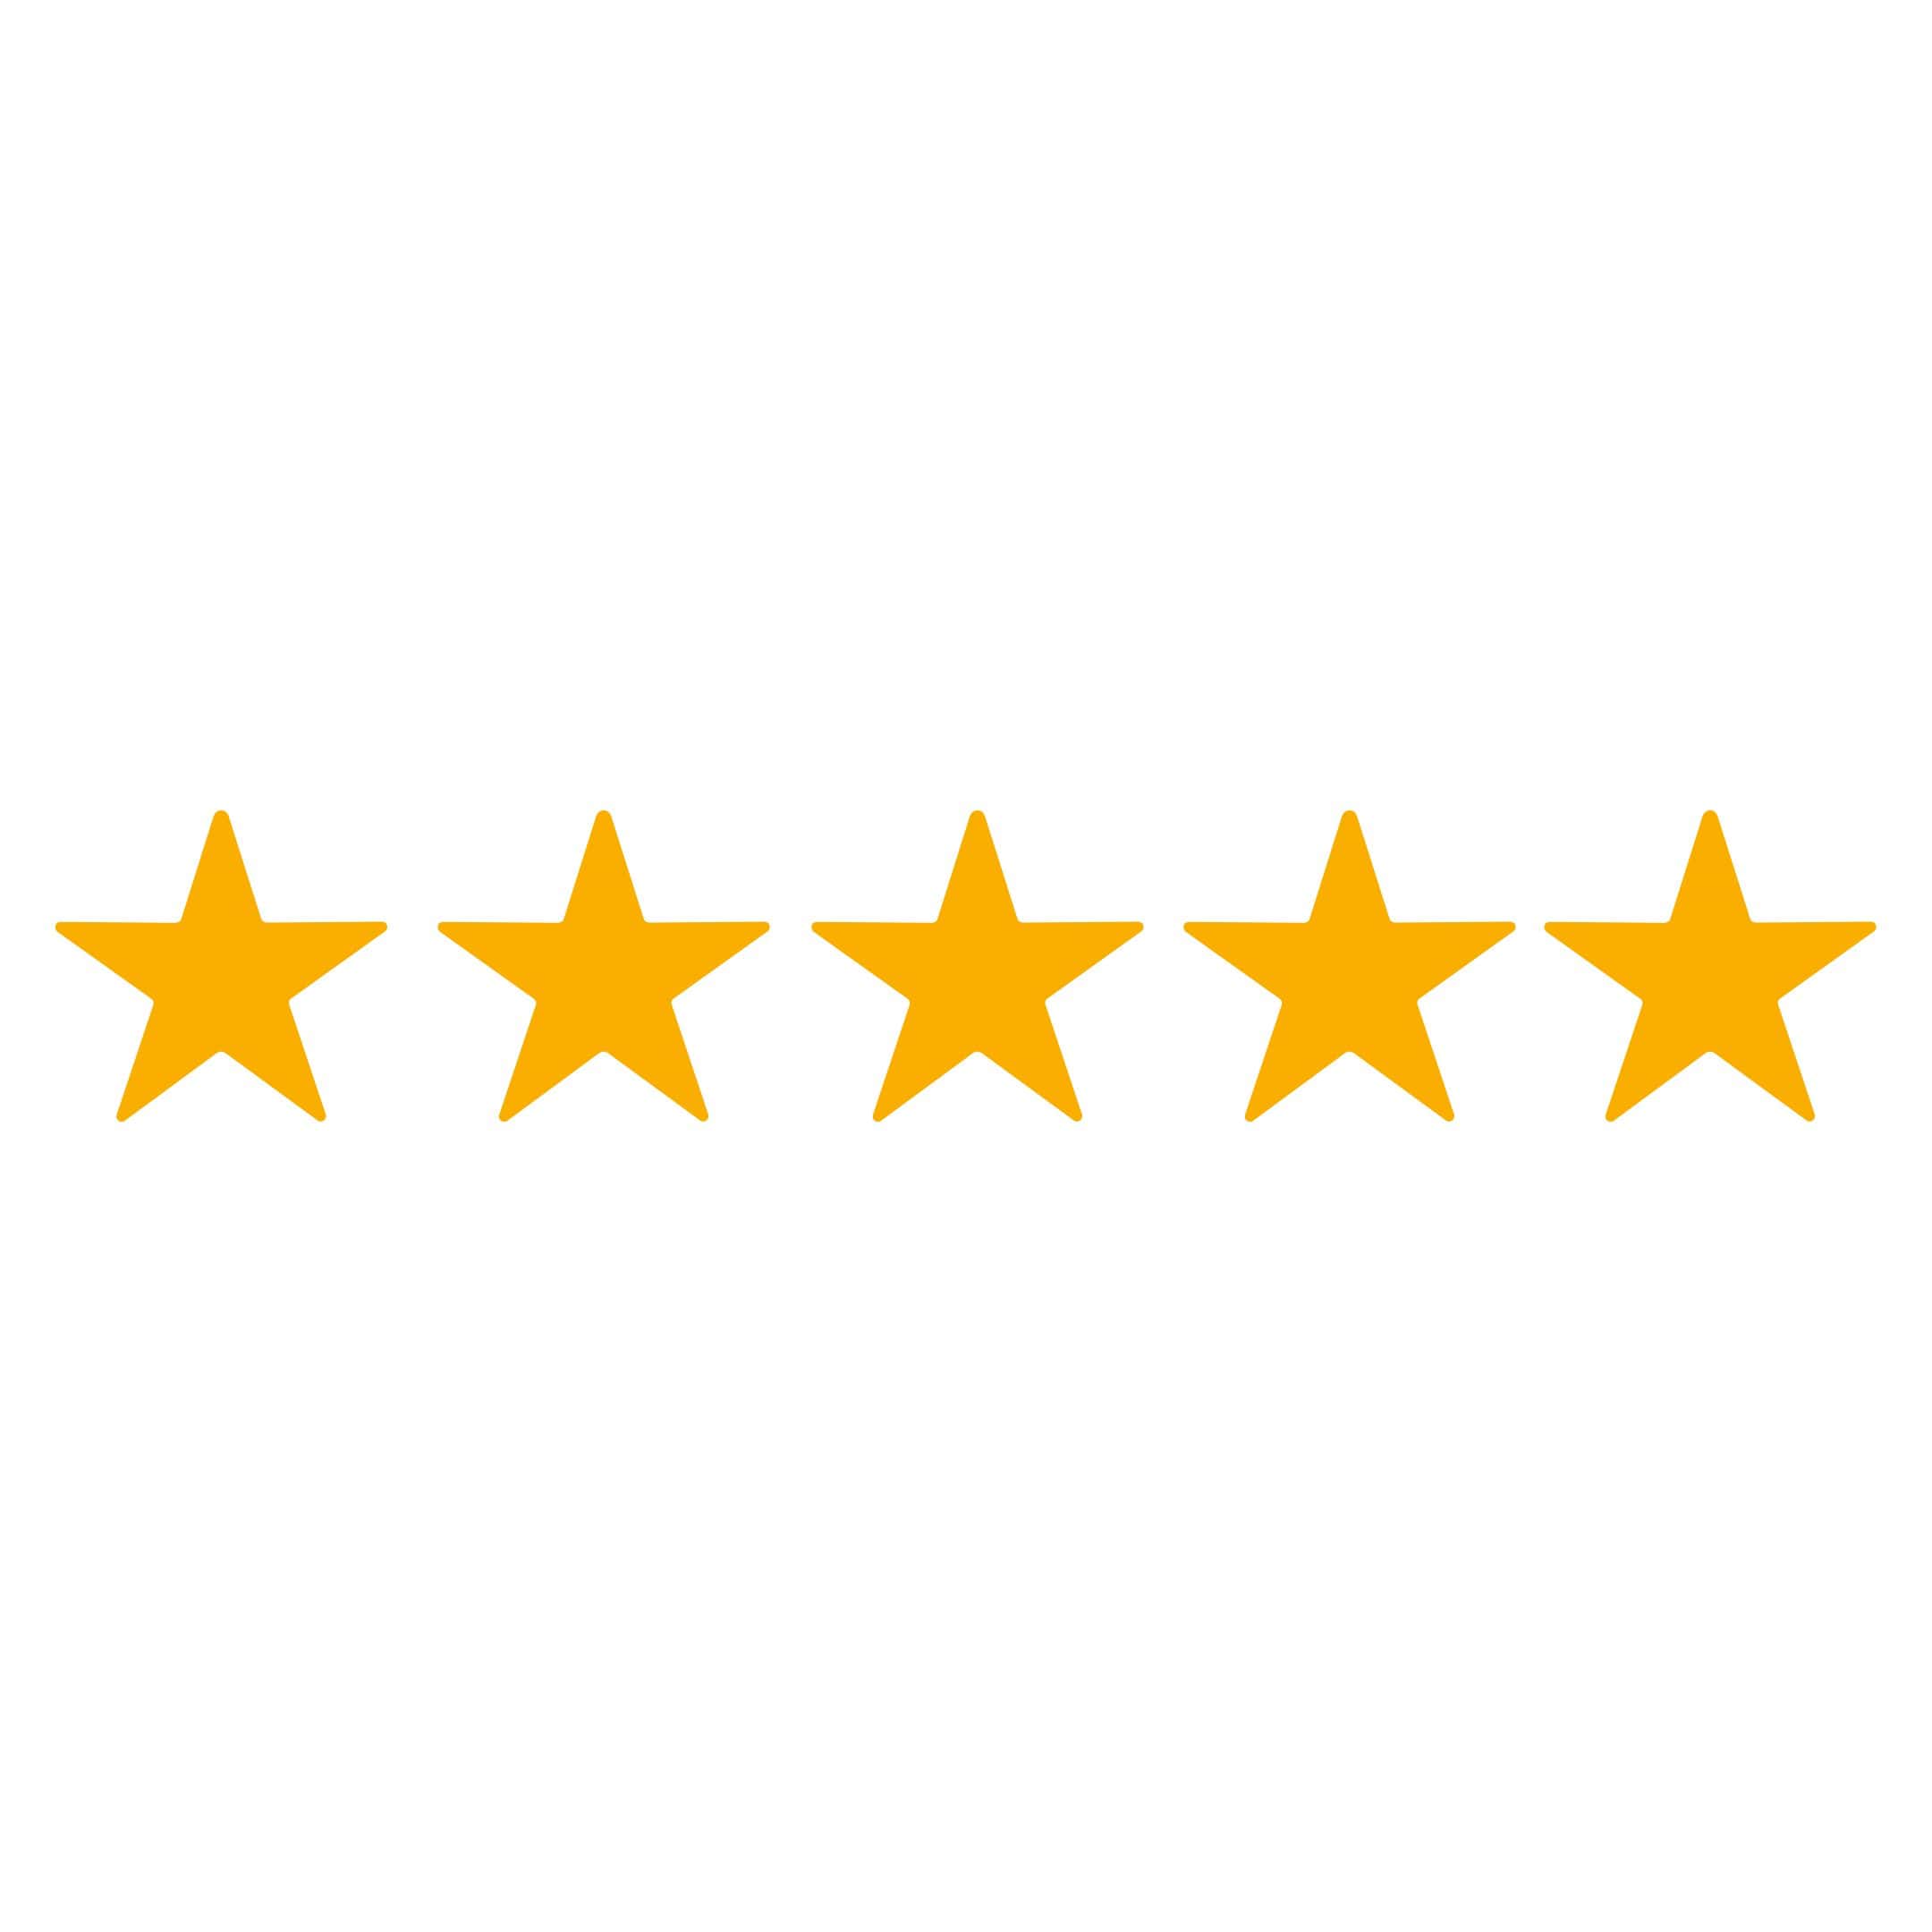 5 gold stars - given five star reviews by our customers